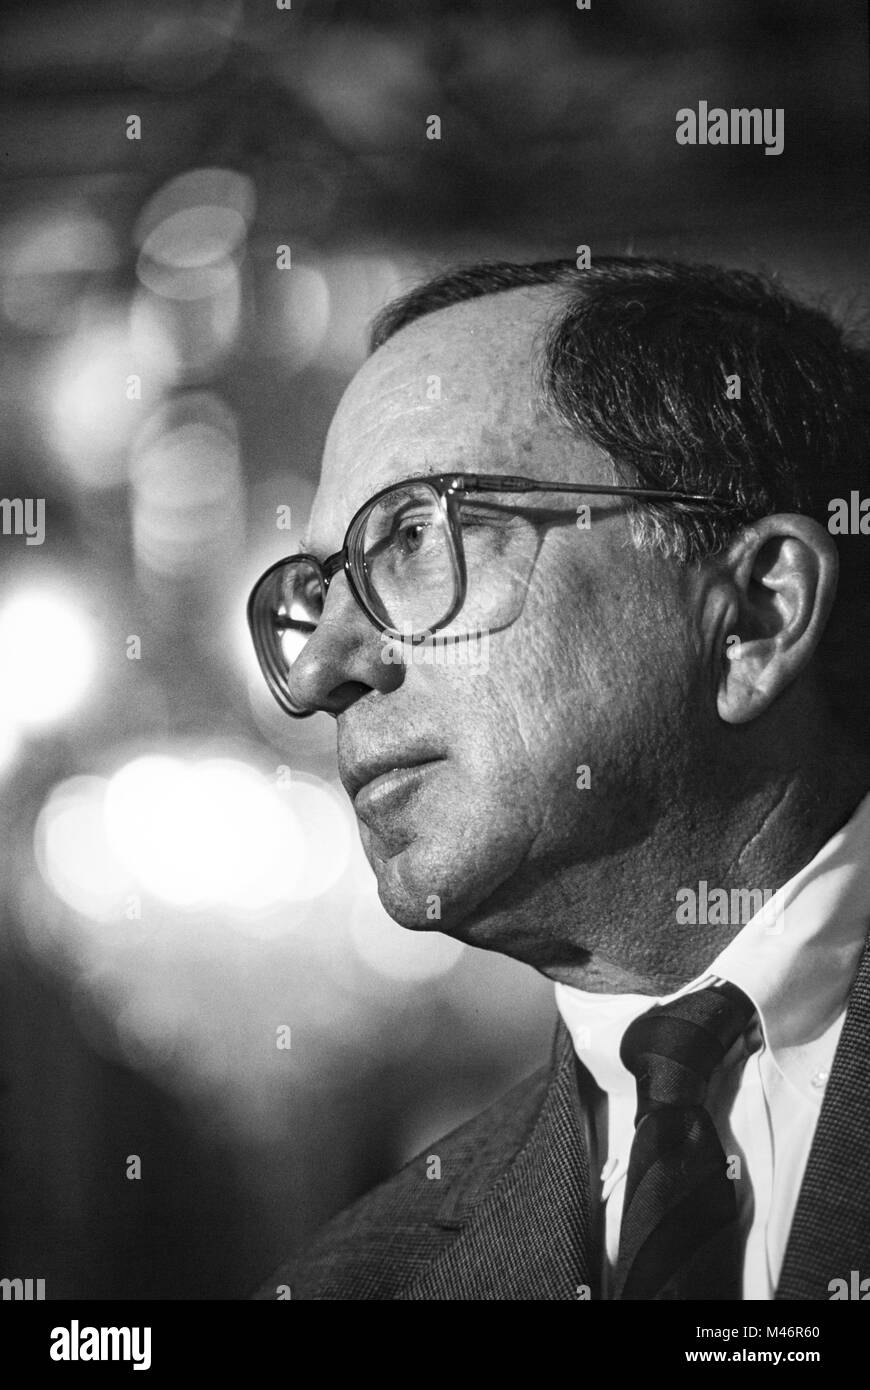 U.S. Senator Sam Nunn, a Democrat from Georgia served as Chairman of the Senate Armed Services Committee until his retirement from politics in 1996. Stock Photo